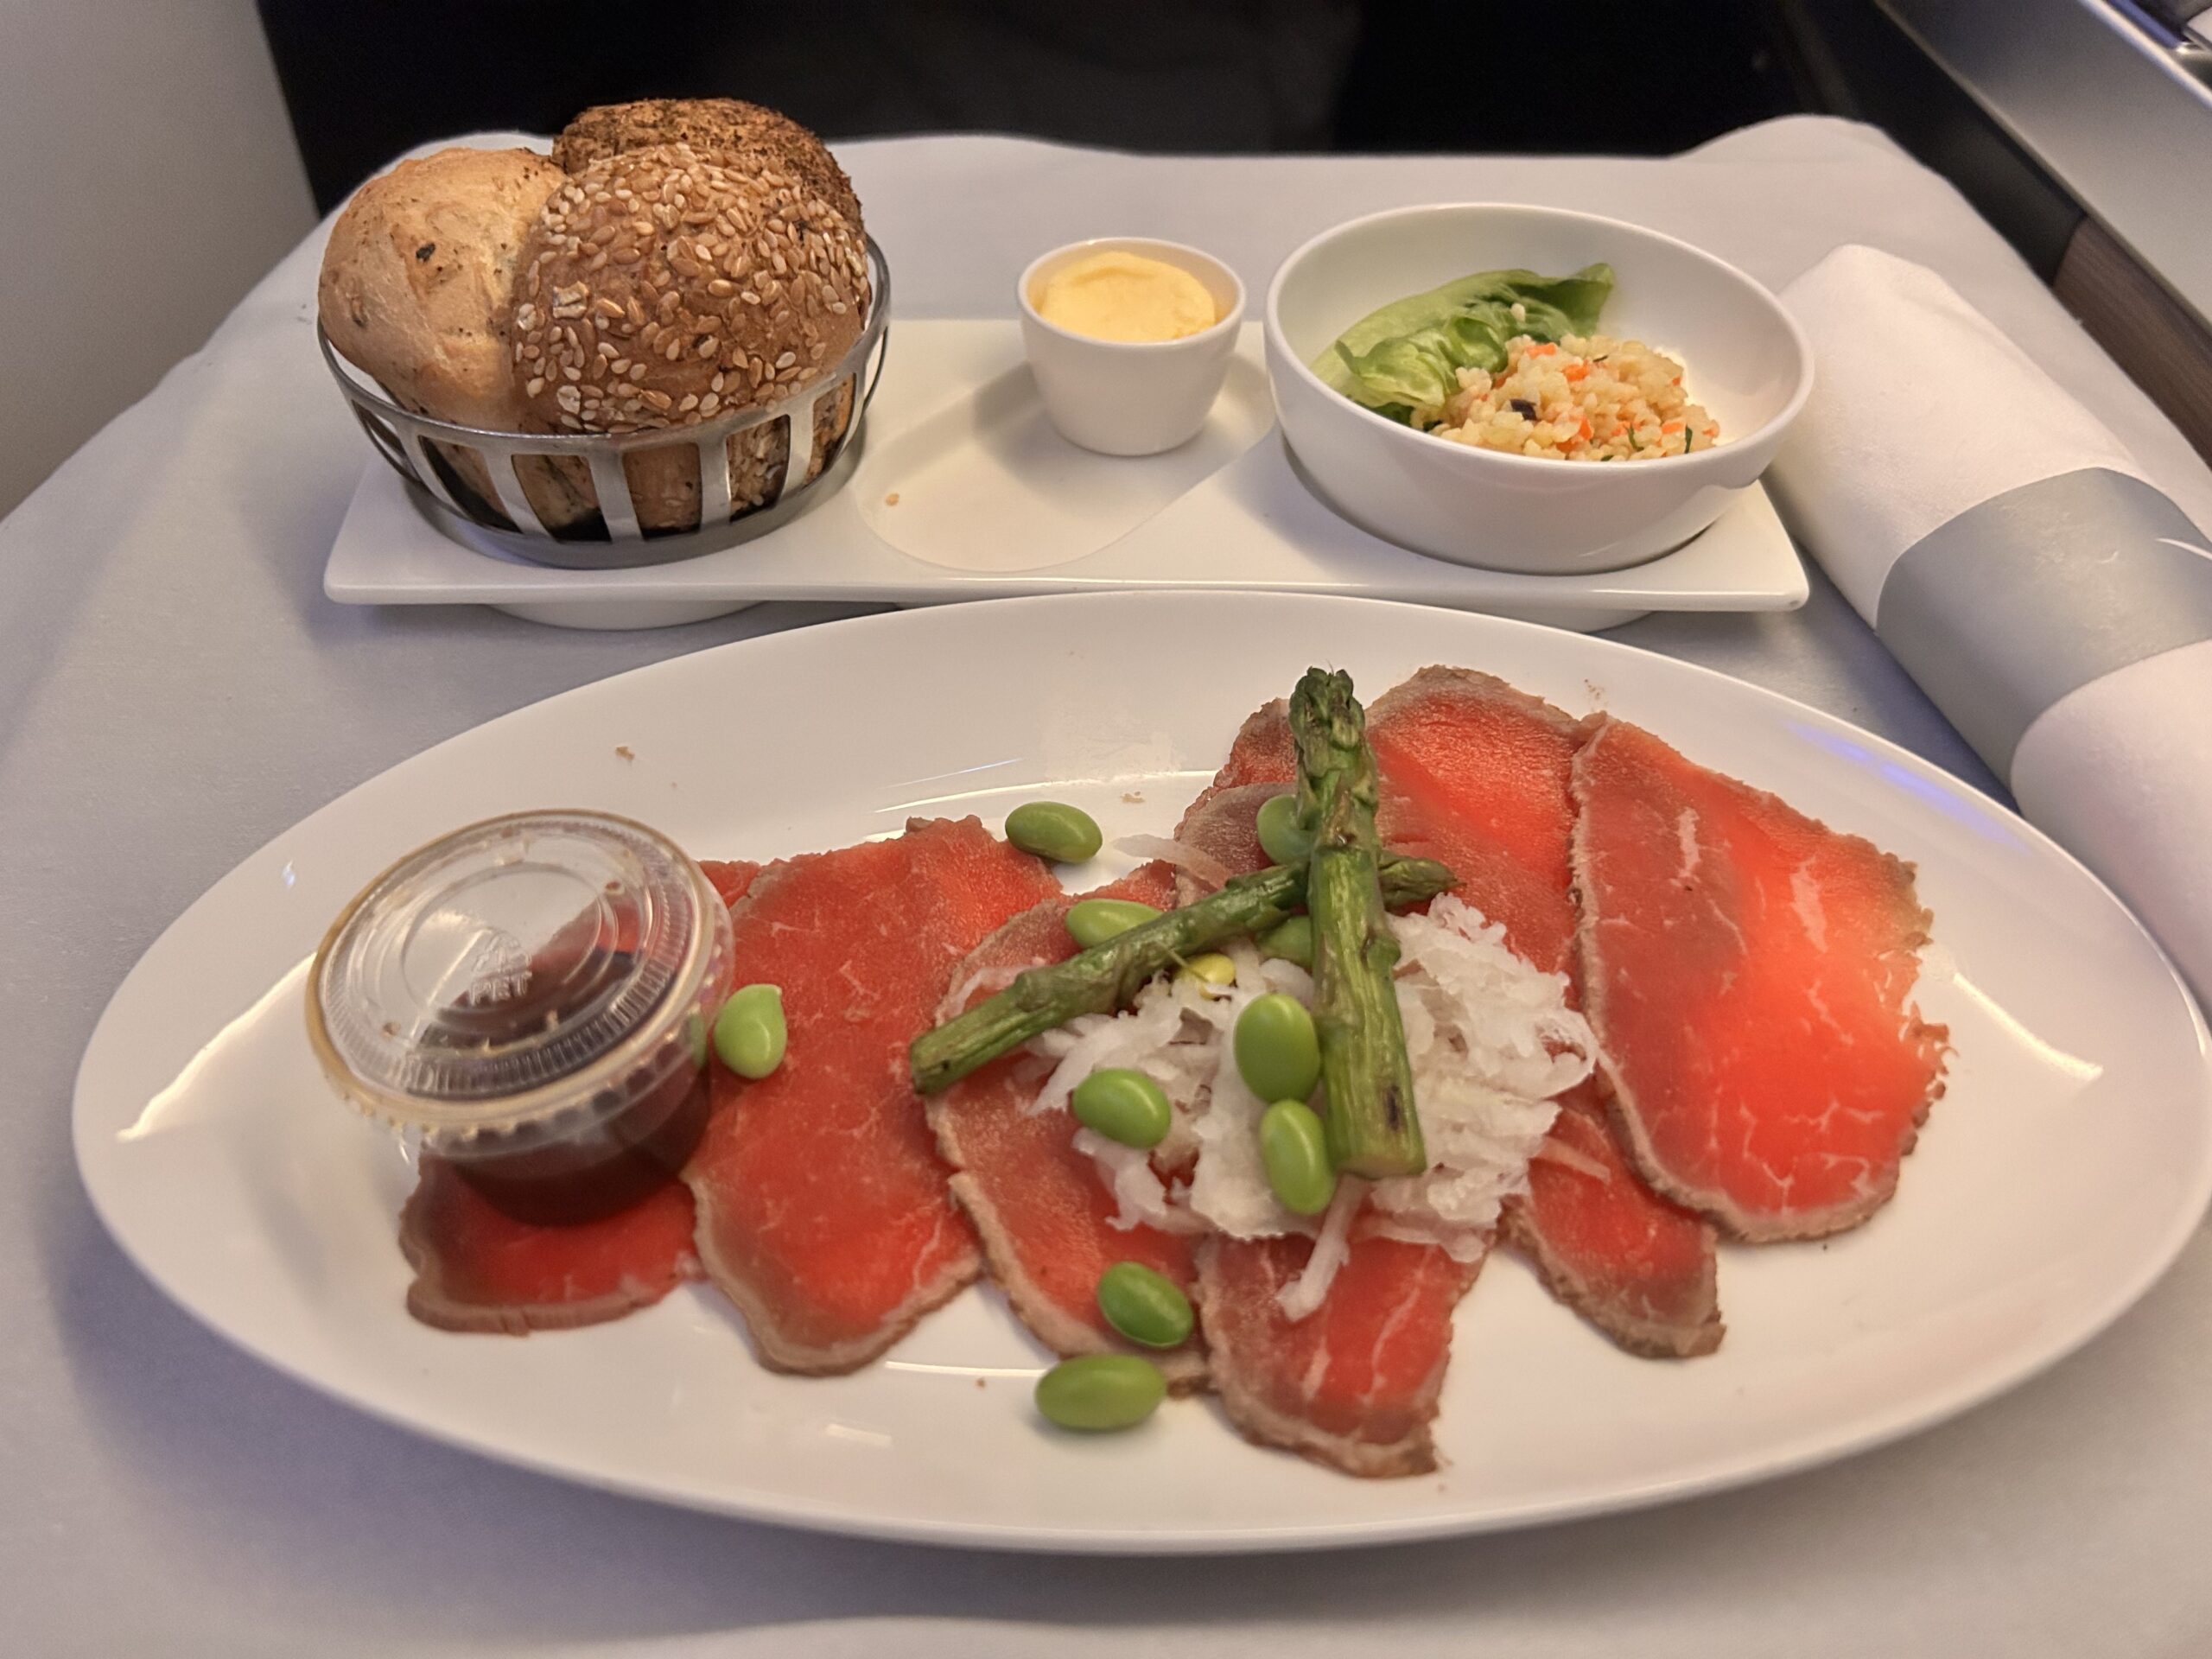 British Airways has long been known for its premium cabins, and Nick Walton discovers a reputation well deserved on a recent flight between London and Hong Kong.